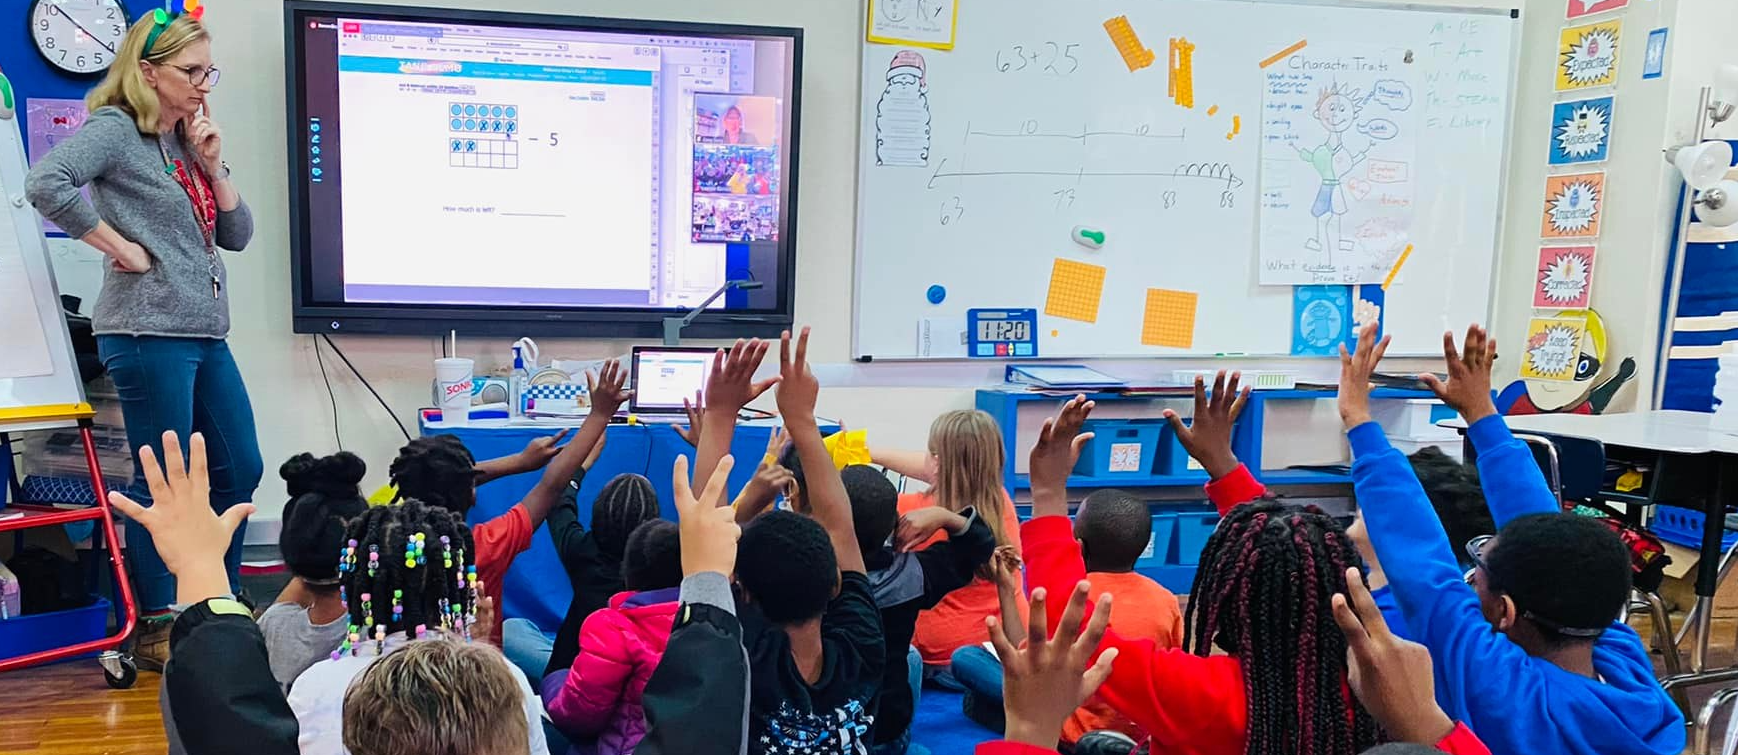 Students raise hands to answer a question during a math lesson.